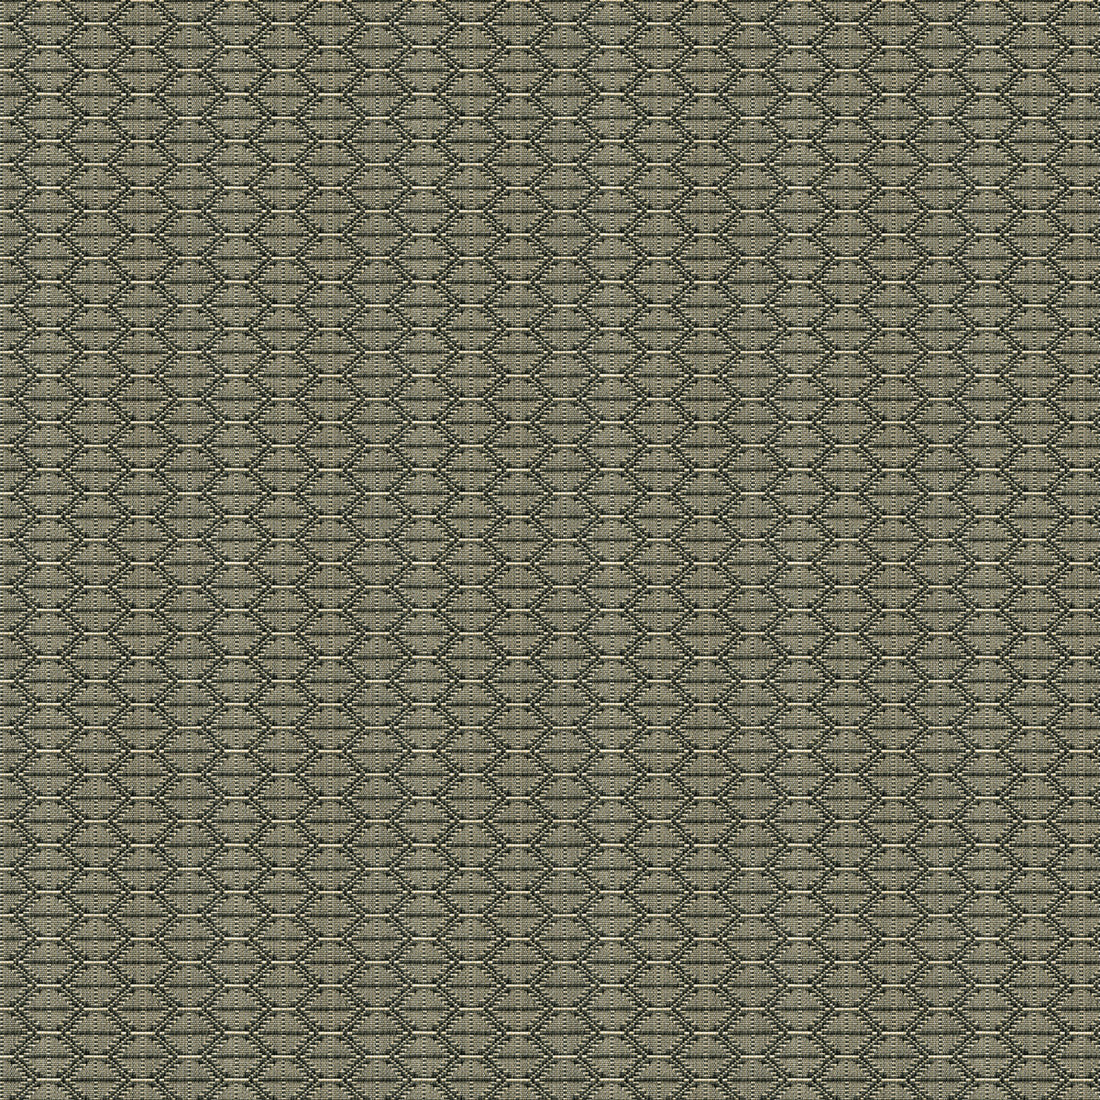 Kravet Design fabric in 33880-1621 color - pattern 33880.1621.0 - by Kravet Design in the Tanzania J Banks collection